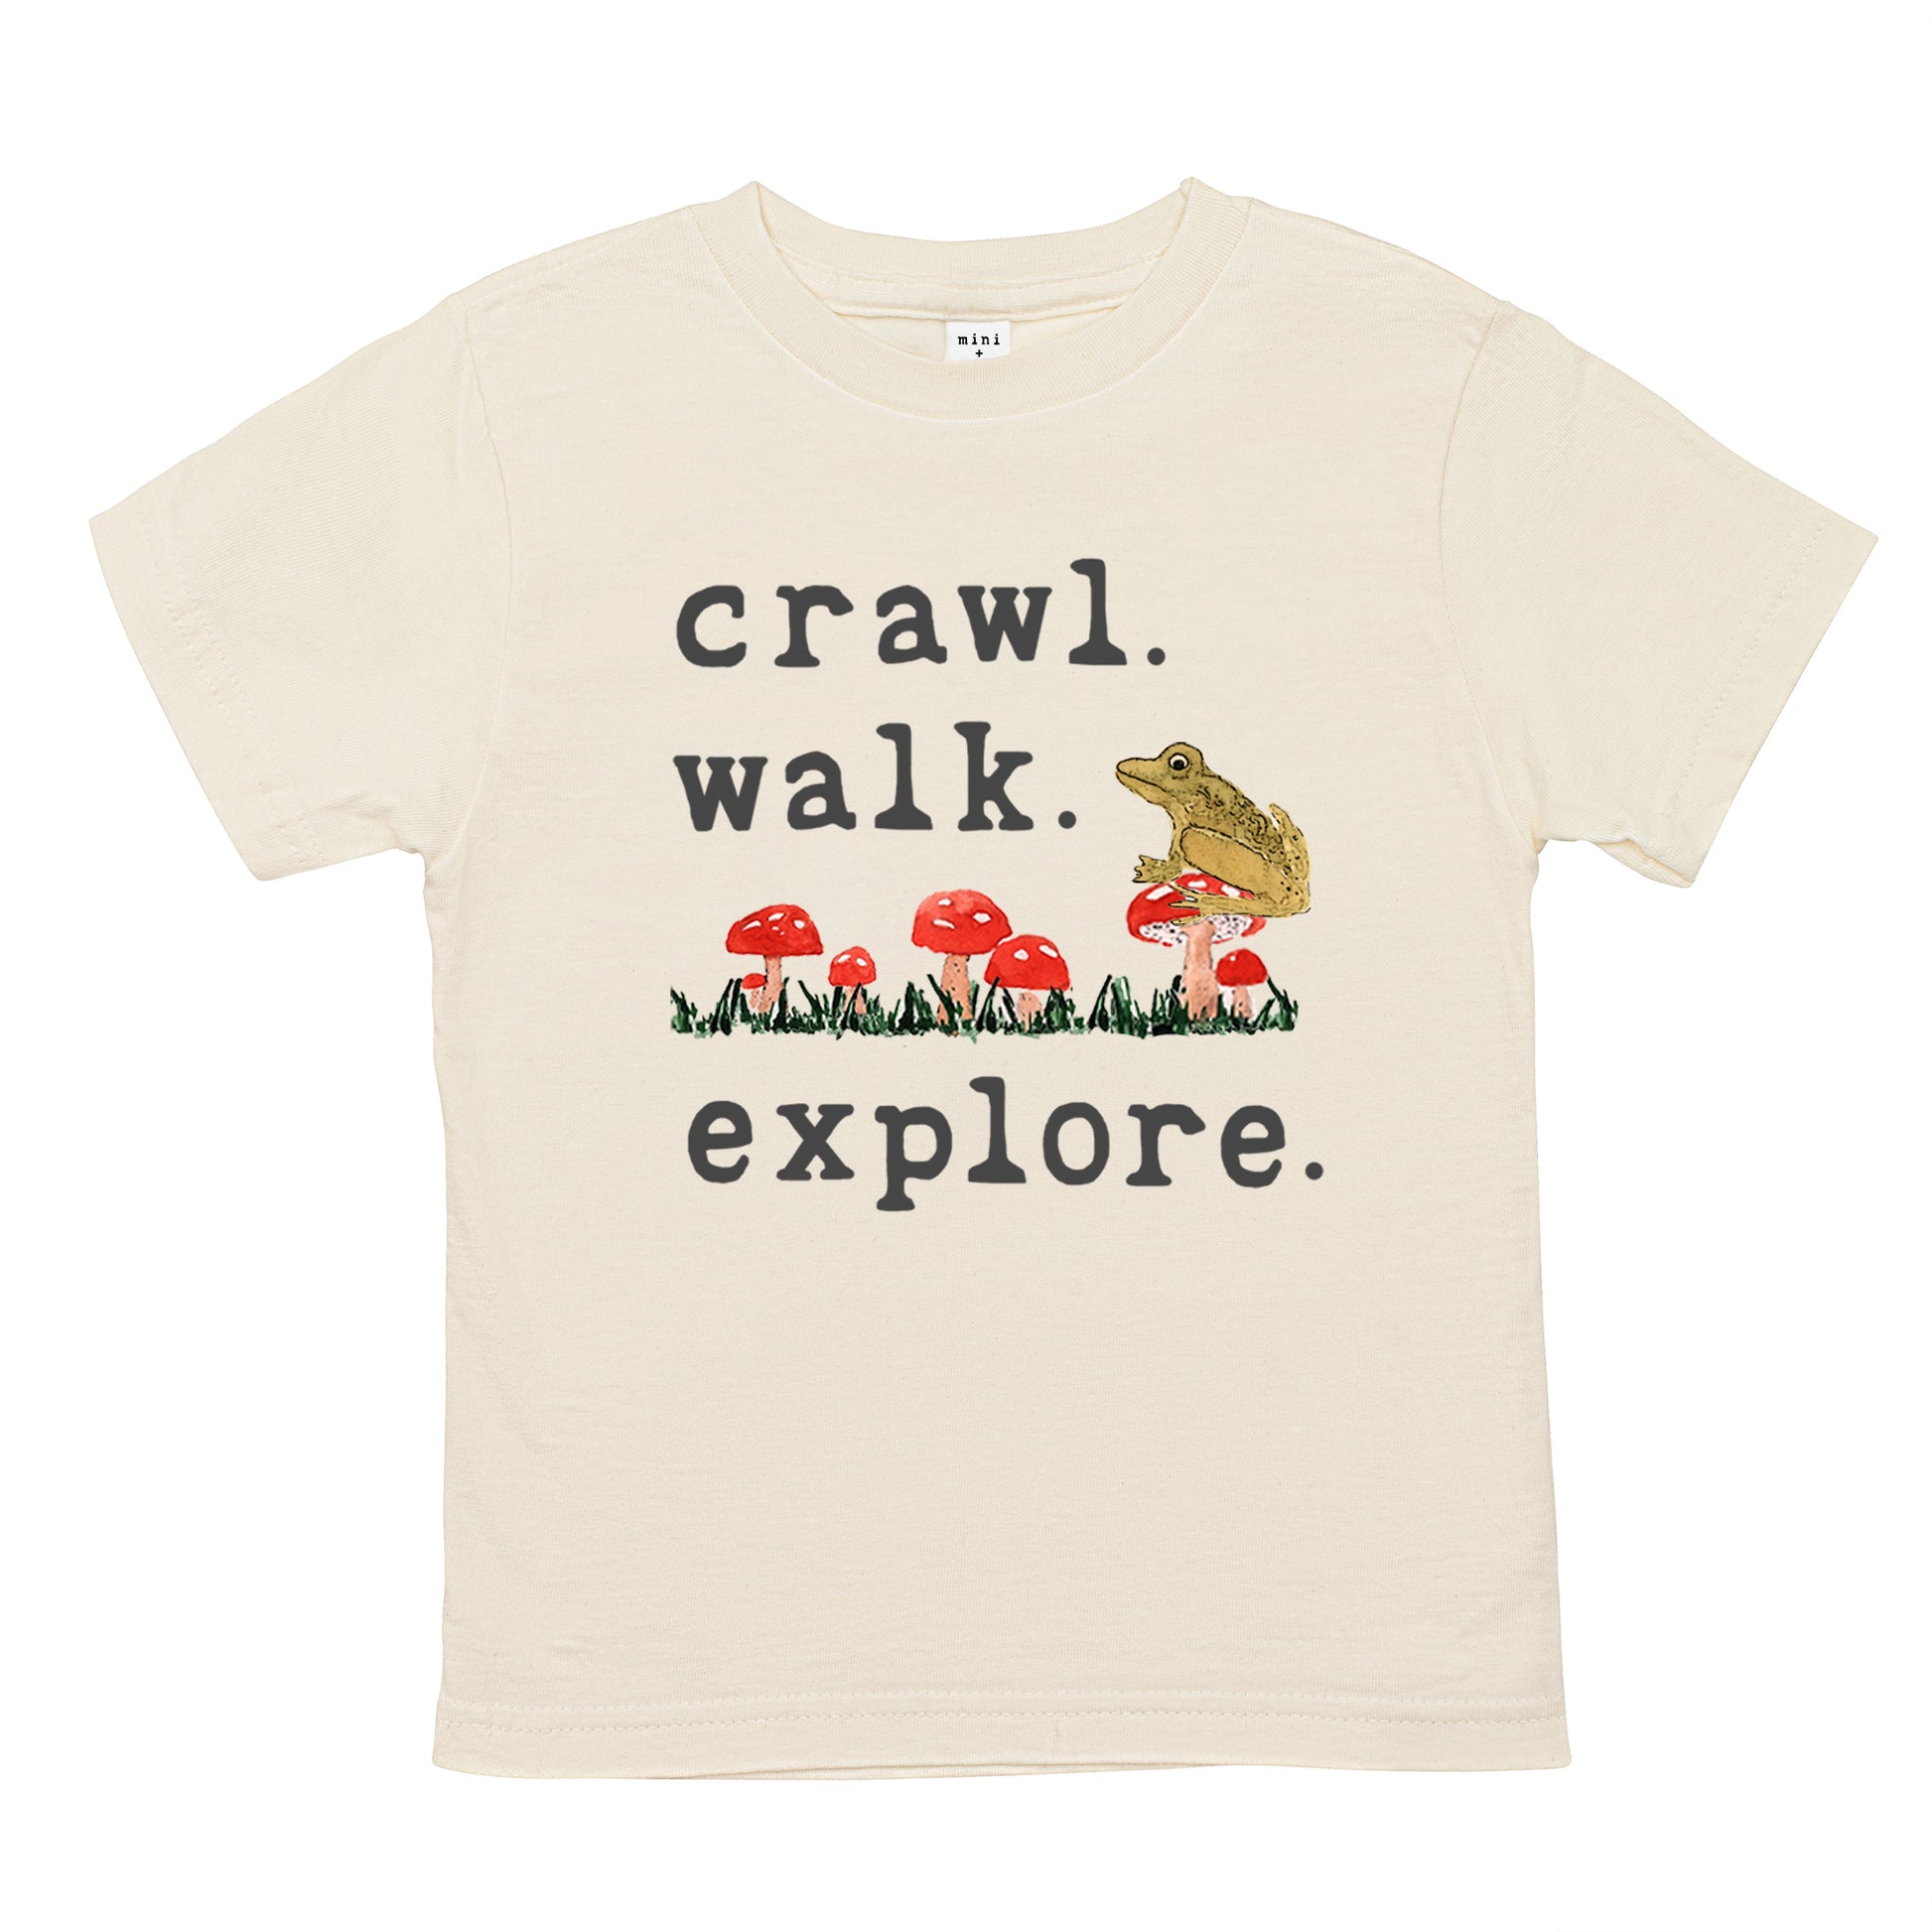 Sustainably made, organic baby and children's apparel that gives back. Organic toddler tee / t-shirt.